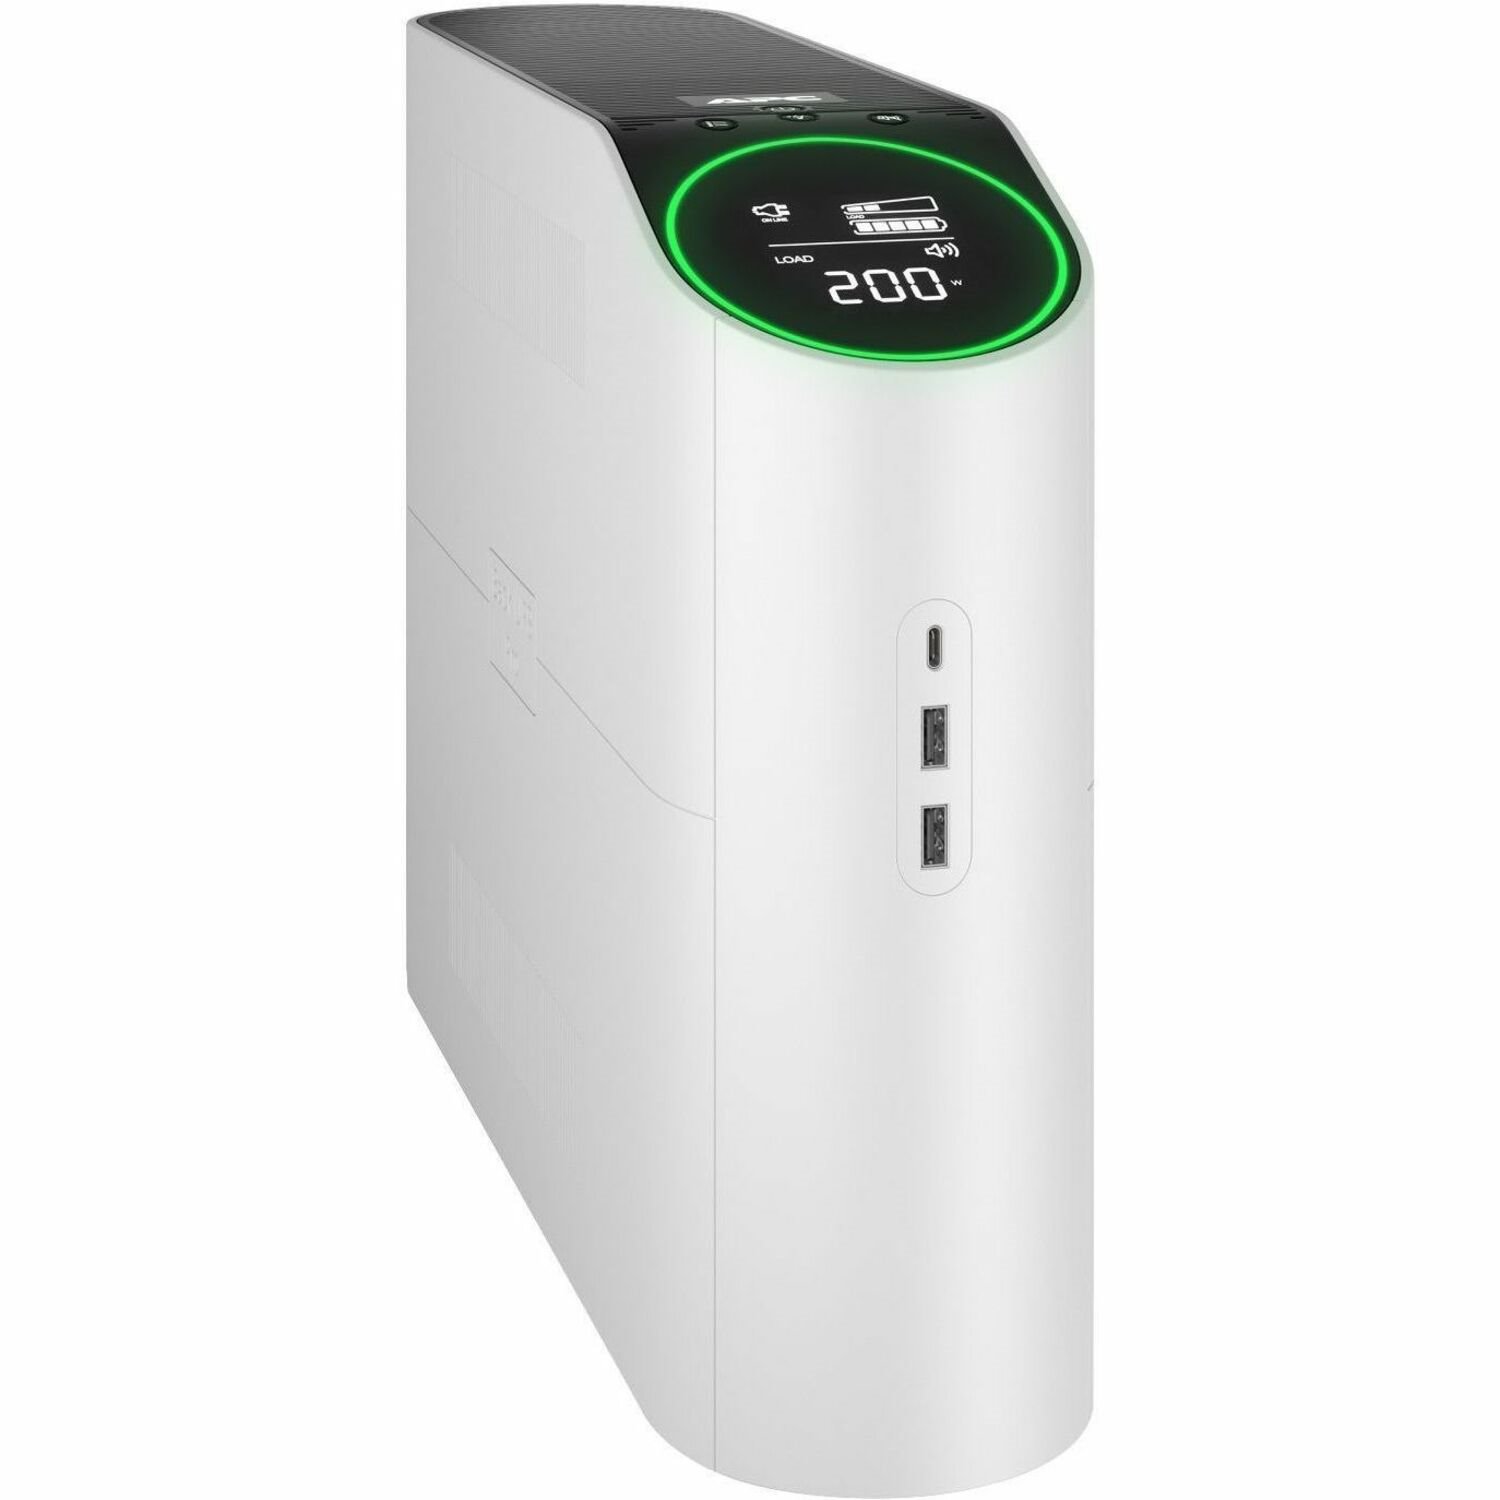 APC by Schneider Electric Back-UPS Pro Line-interactive UPS - 2.20 kVA/1.32 kW